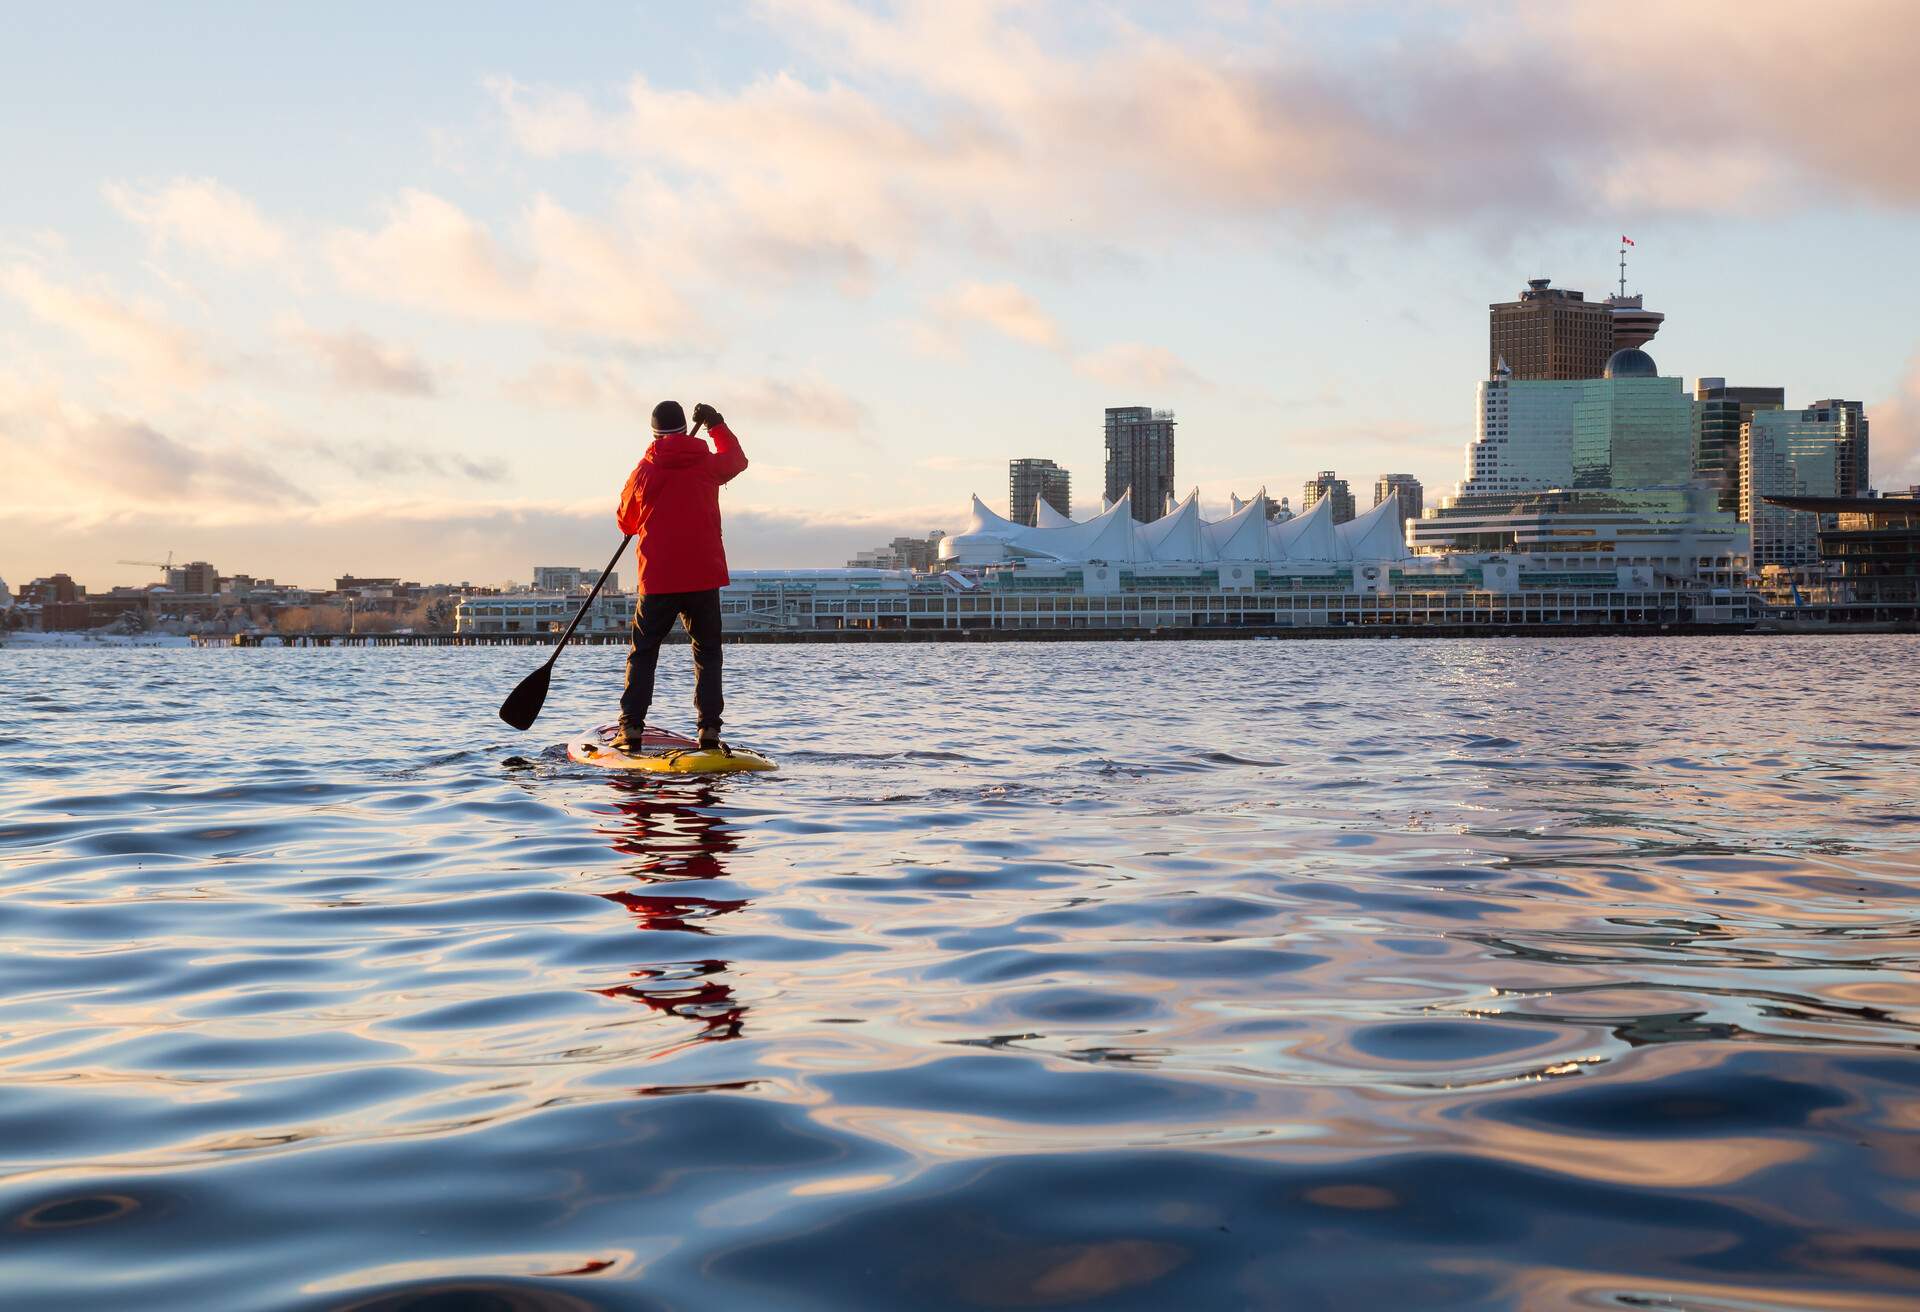 Adventurous man is paddle boarding near Downtown City during a vibrant winter sunrise. Taken in Coal Harbour, Vancouver, British Columbia, Canada.